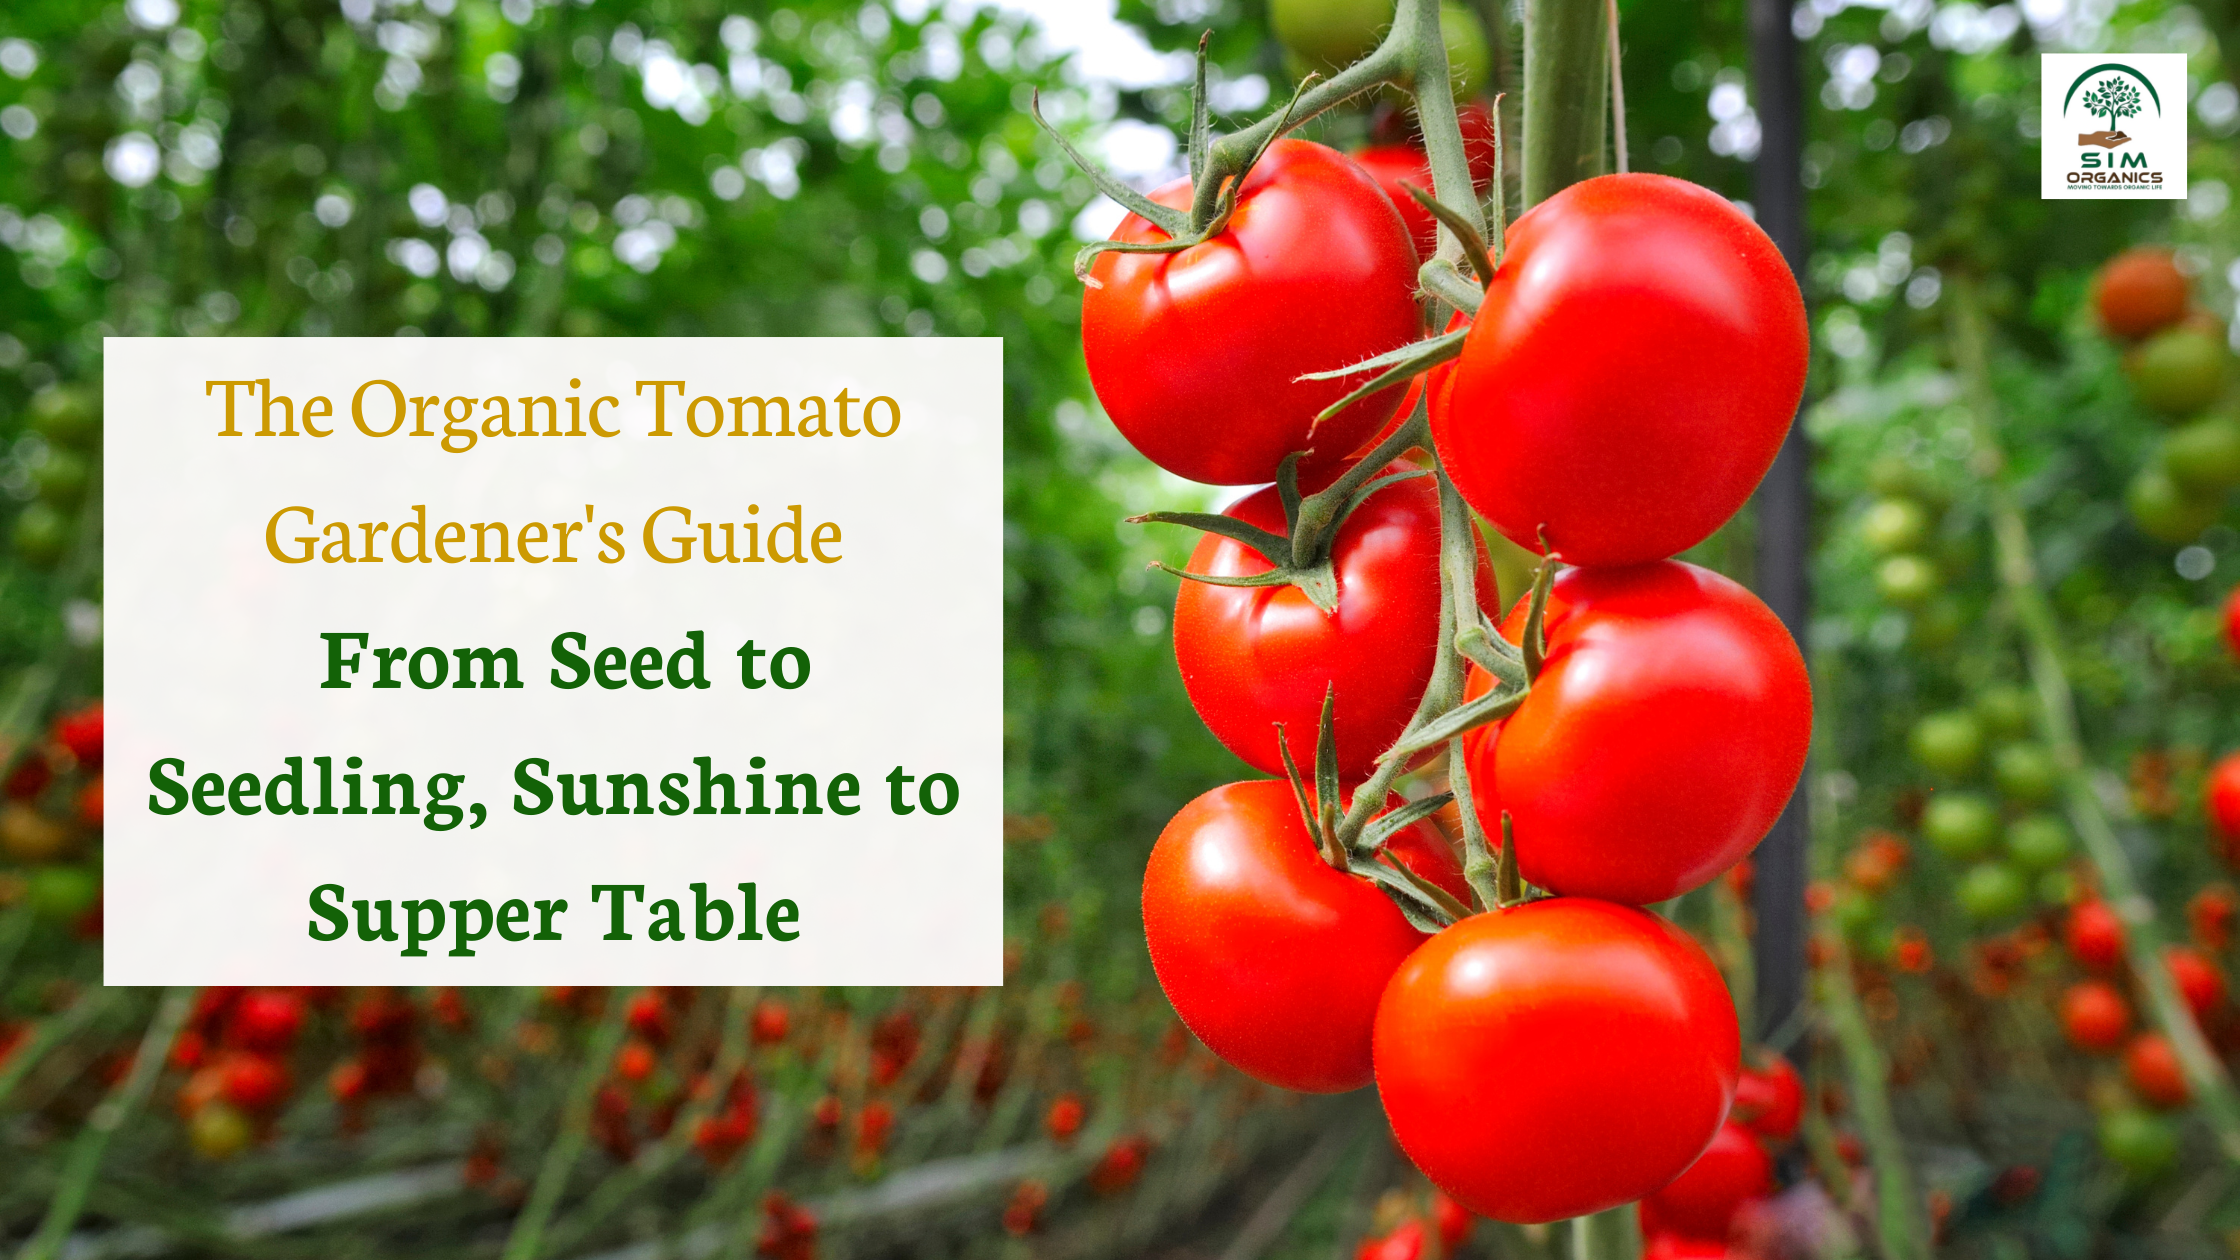 The Organic Tomato Gardener's Guide: From Seed to Seedling, Sunshine to Supper Table